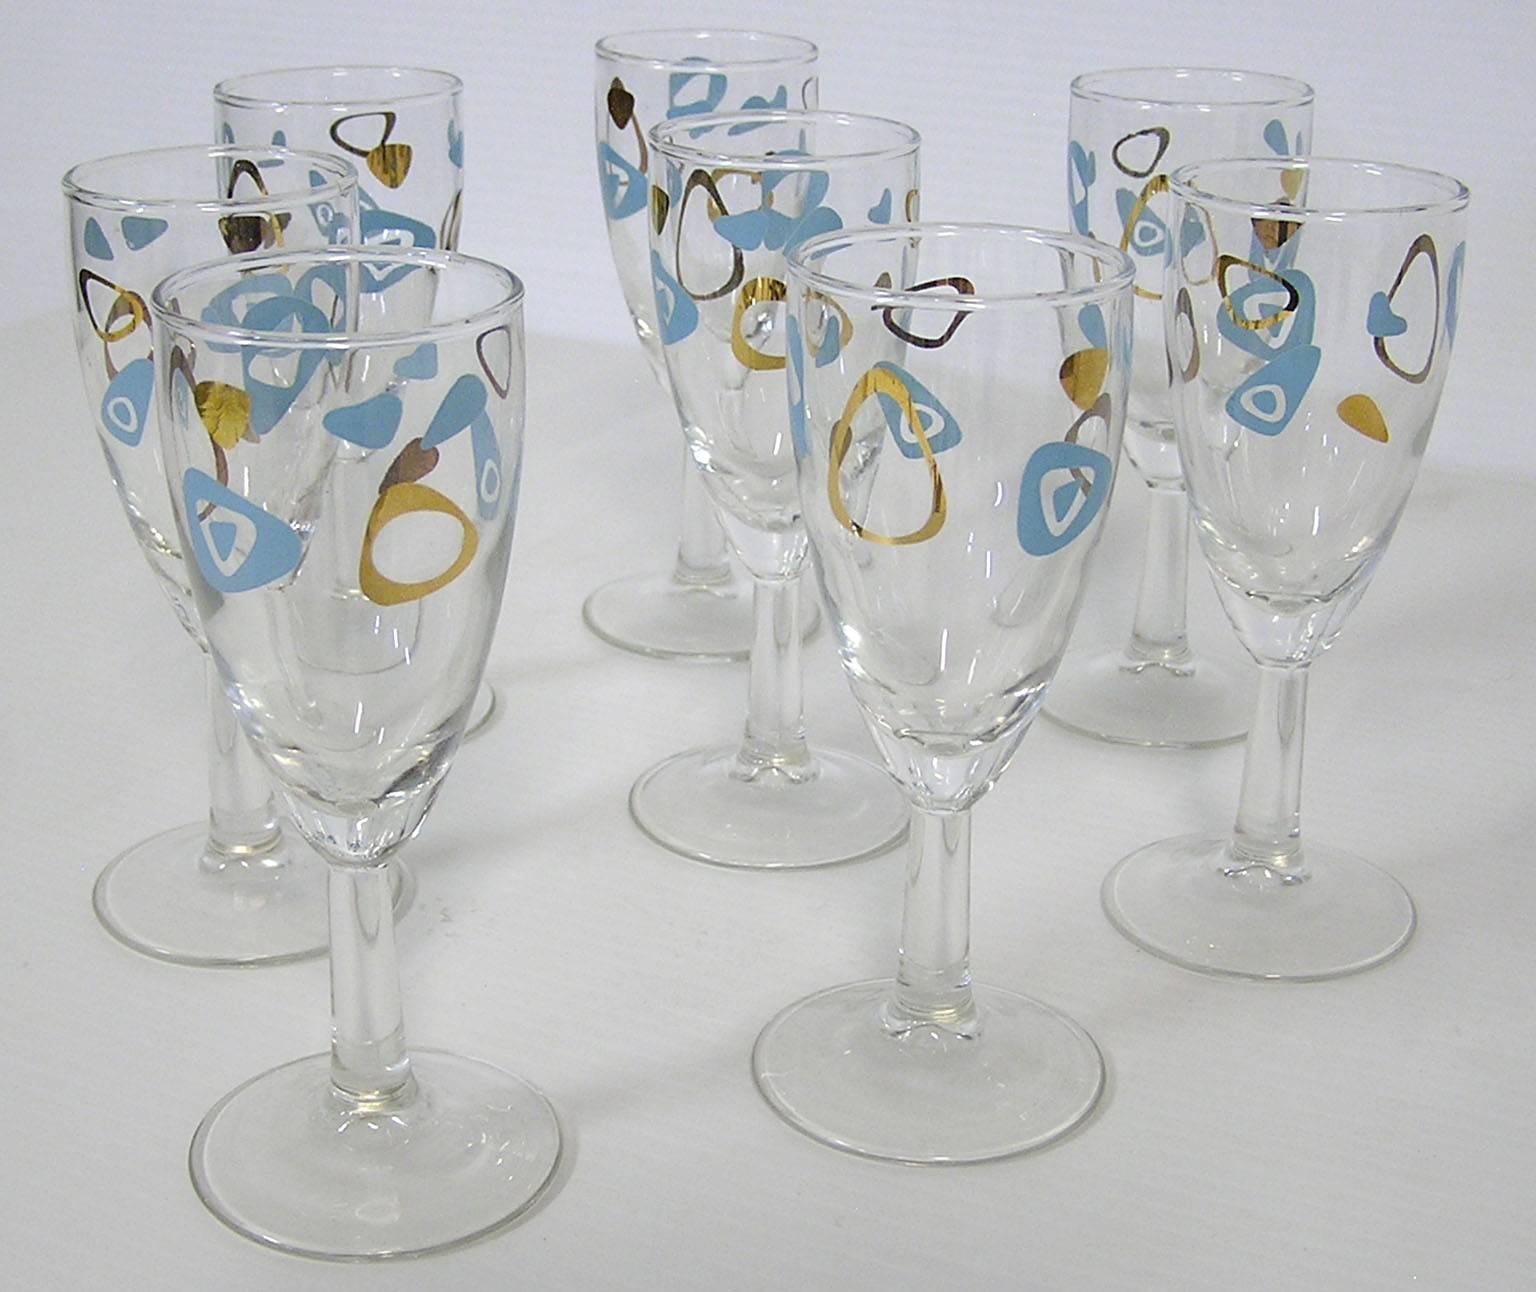 A set of eight fluted wine glasses from the 1950s Mid-Century Modern era. Manufactured by the federal glass company and commonly referred to as amoeba boomerang glasses the set is wonderfully decorated throughout in a turquoise and 22-karat gold